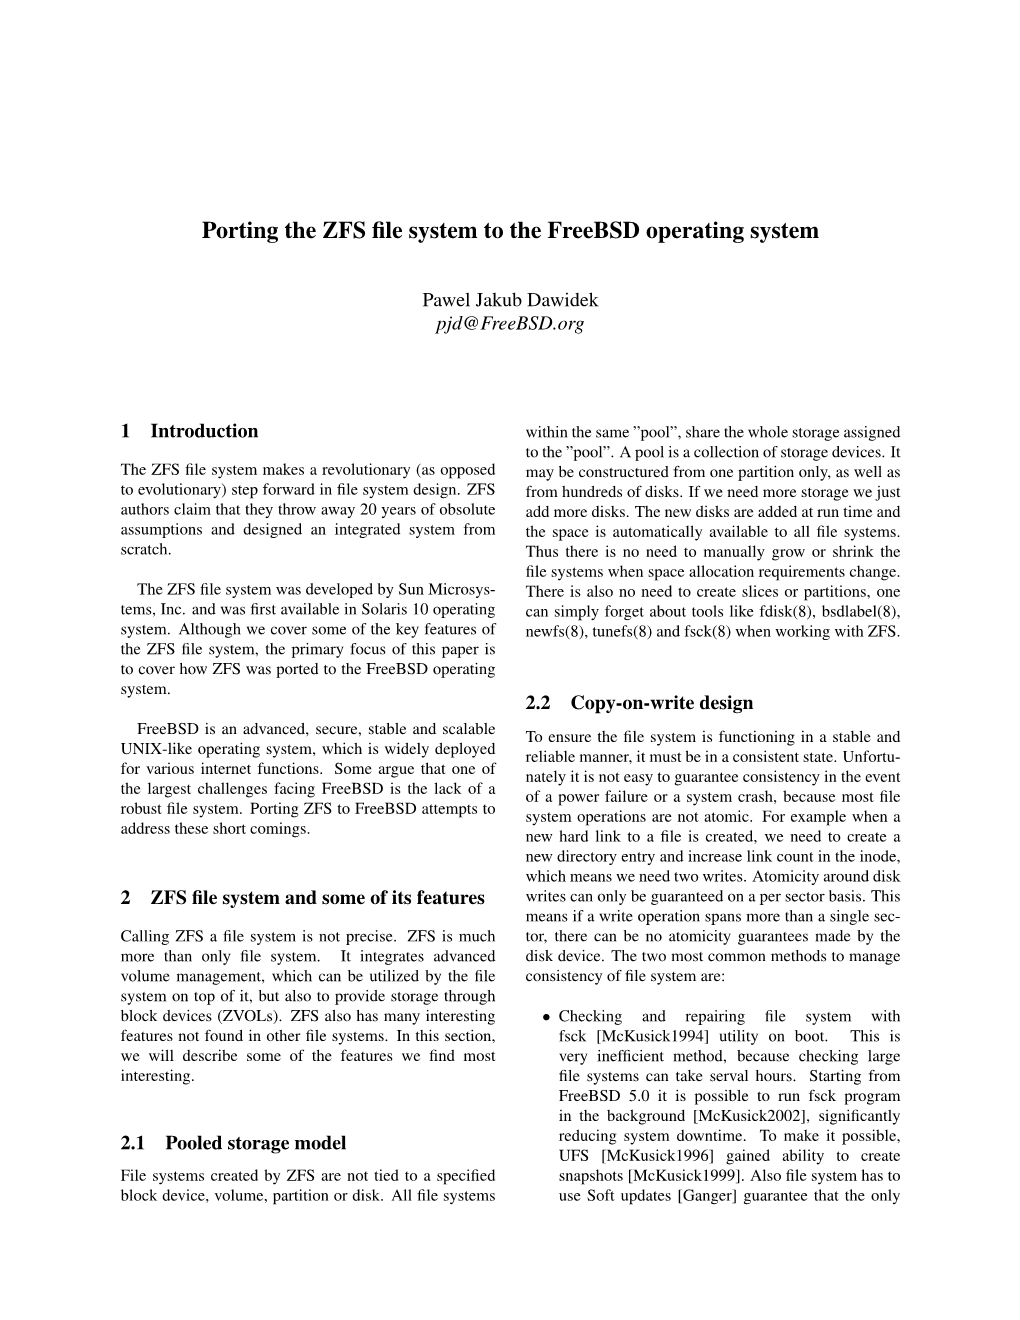 Porting the ZFS File System to the Freebsd Operating System